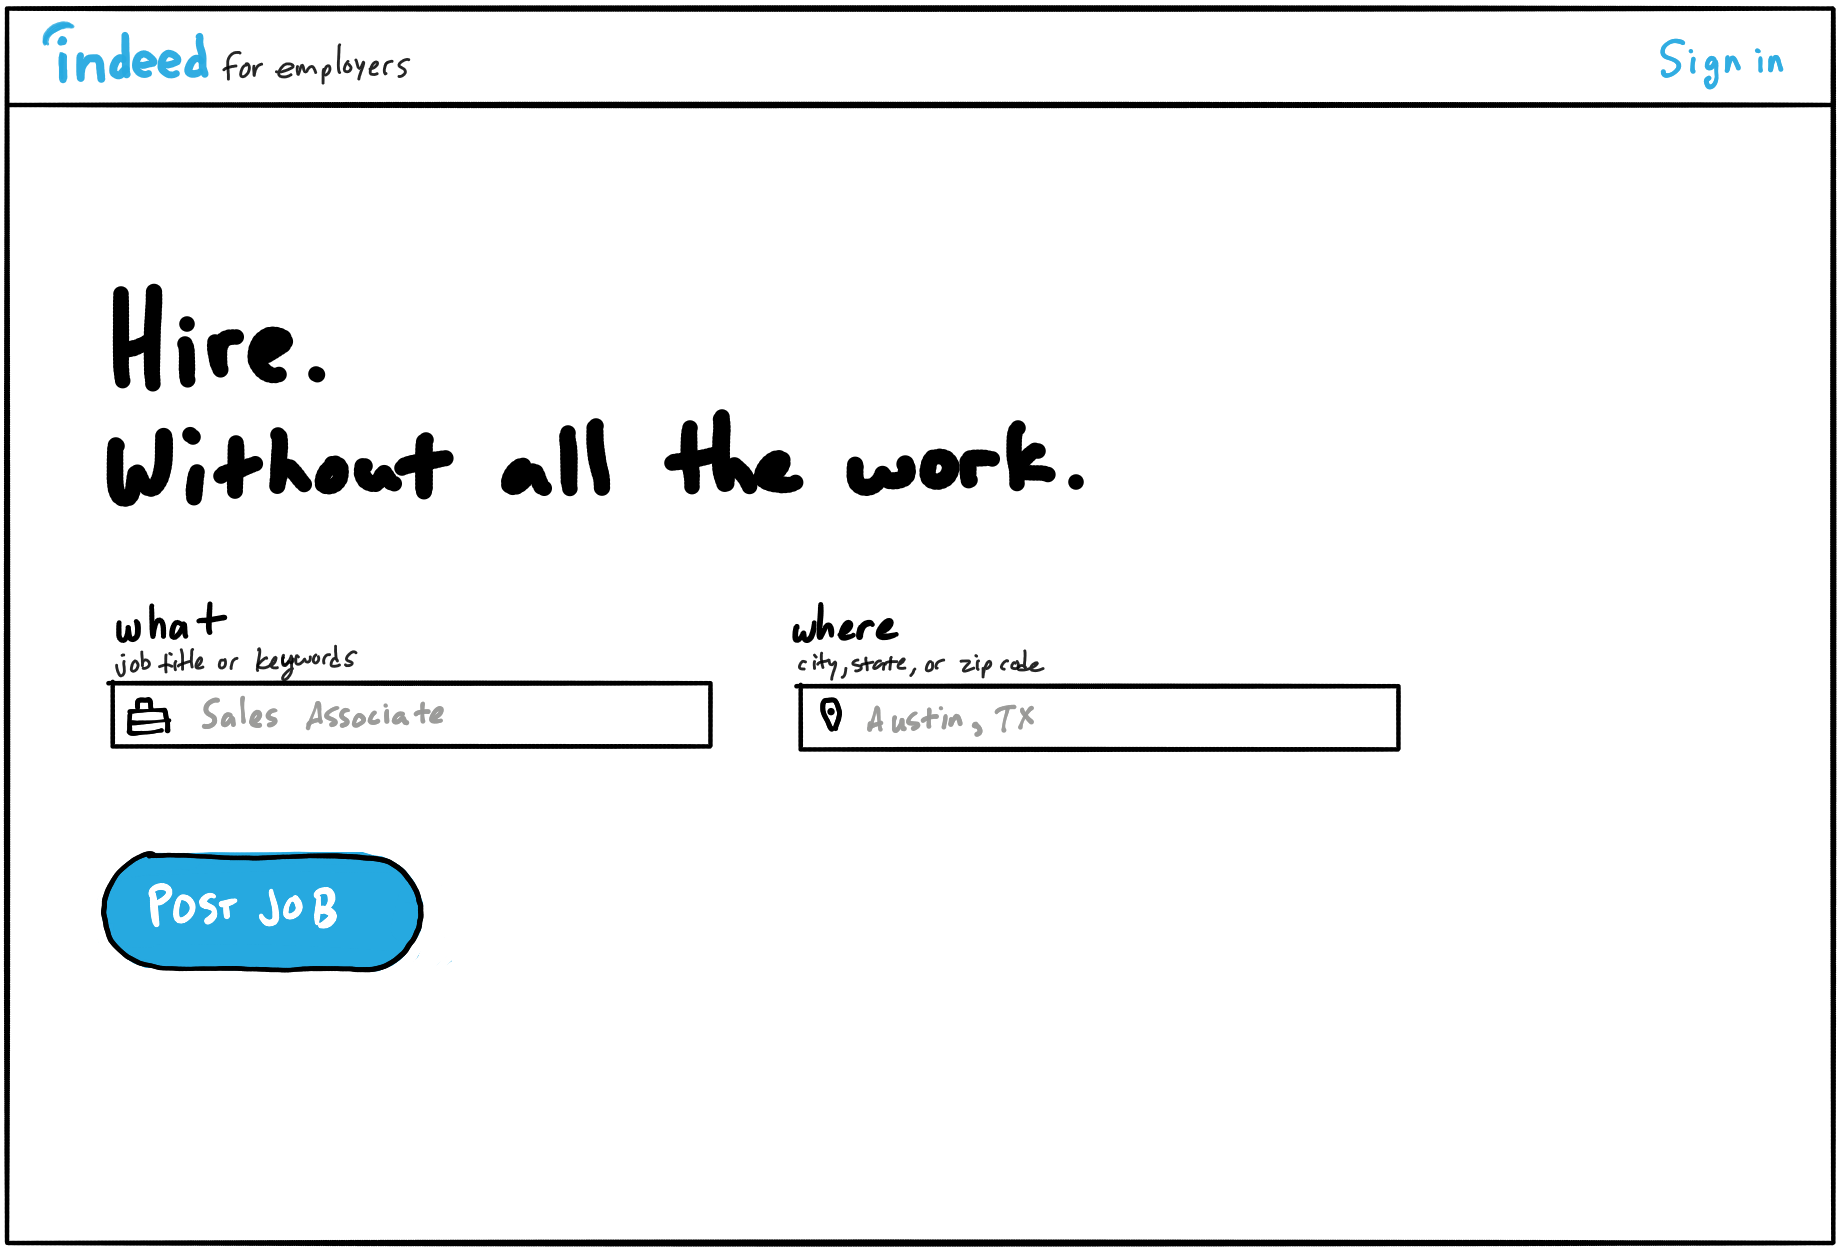 A basic hand-drawing of an Indeed homepage for employers. Hero text reads, "Hire. Without all the work." Below are two entry fields for job title and location and a "Post job" button.